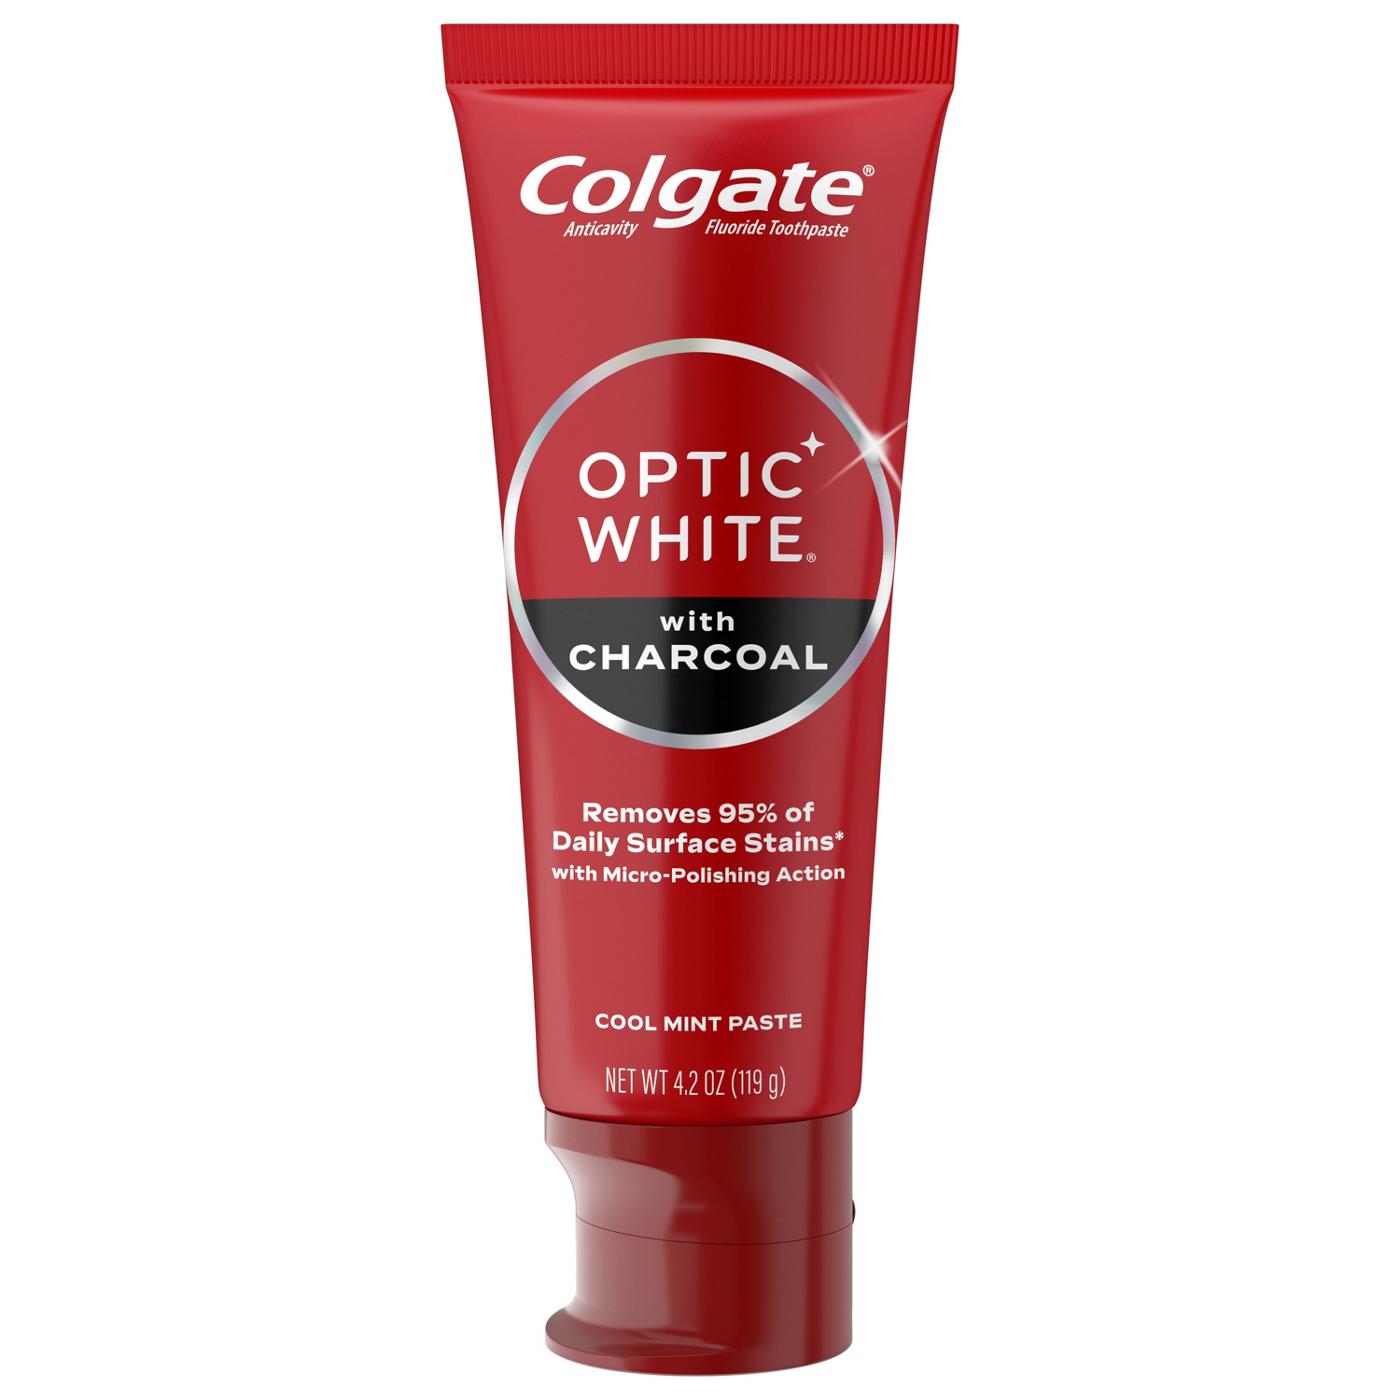 Colgate Optic White with Charcoal Anticavity Toothpaste - Cool Mint; image 4 of 10